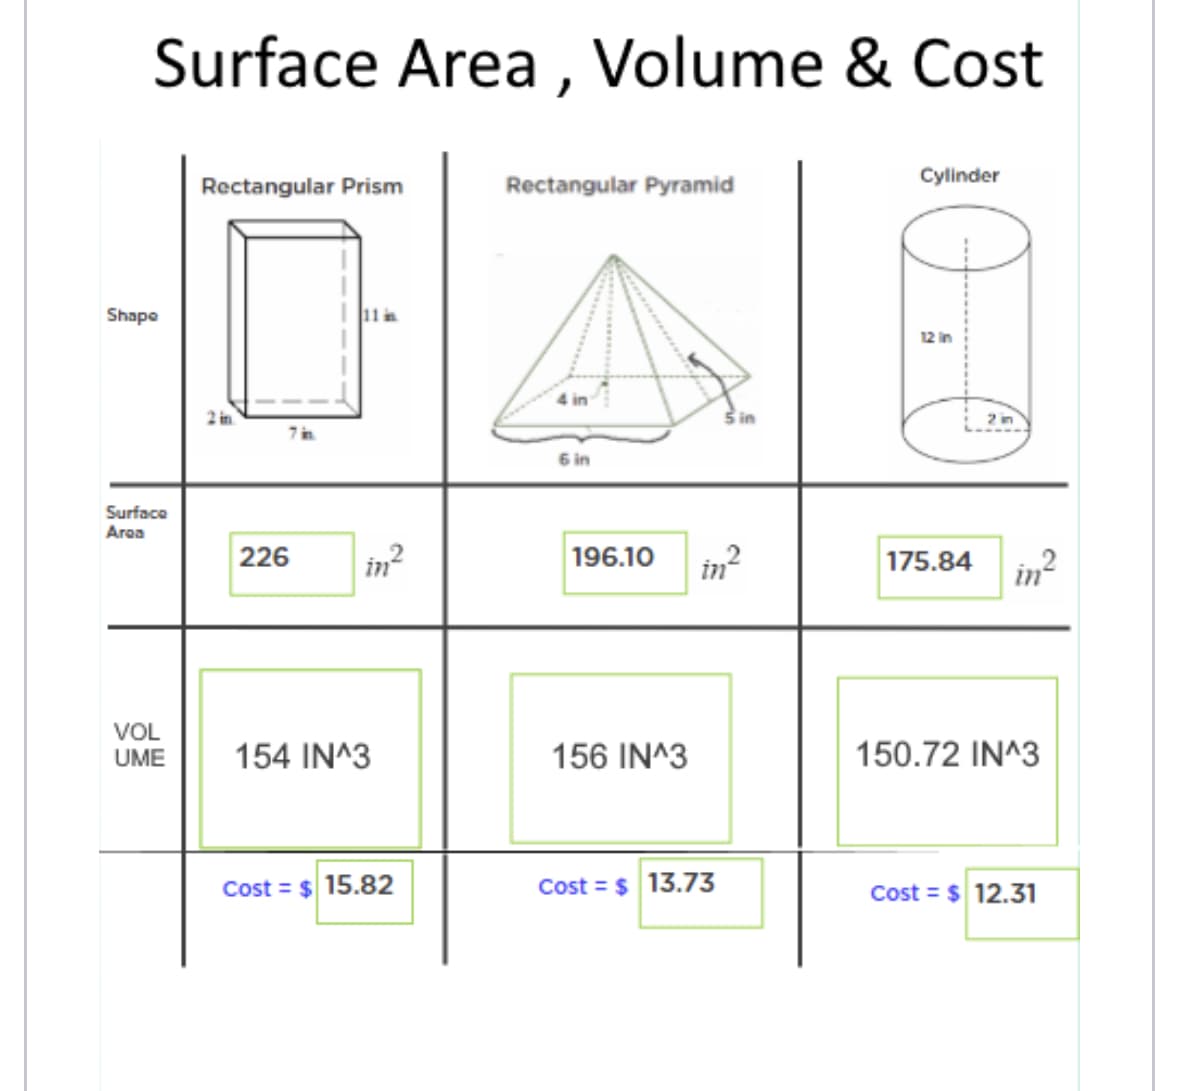 Surface Area, Volume & Cost
Shape
Surface
Area
VOL
UME
Rectangular Prism
2 in
7 in
226
11 in
in 2
154 IN^3
Cost = $15.82
Rectangular Pyramid
4 in
6 in
196.10
156 IN^3
5 in
in²
Cost = $13.73
Cylinder
12 in
2 in
175.84 in²
150.72 IN^3
Cost = $ 12.31